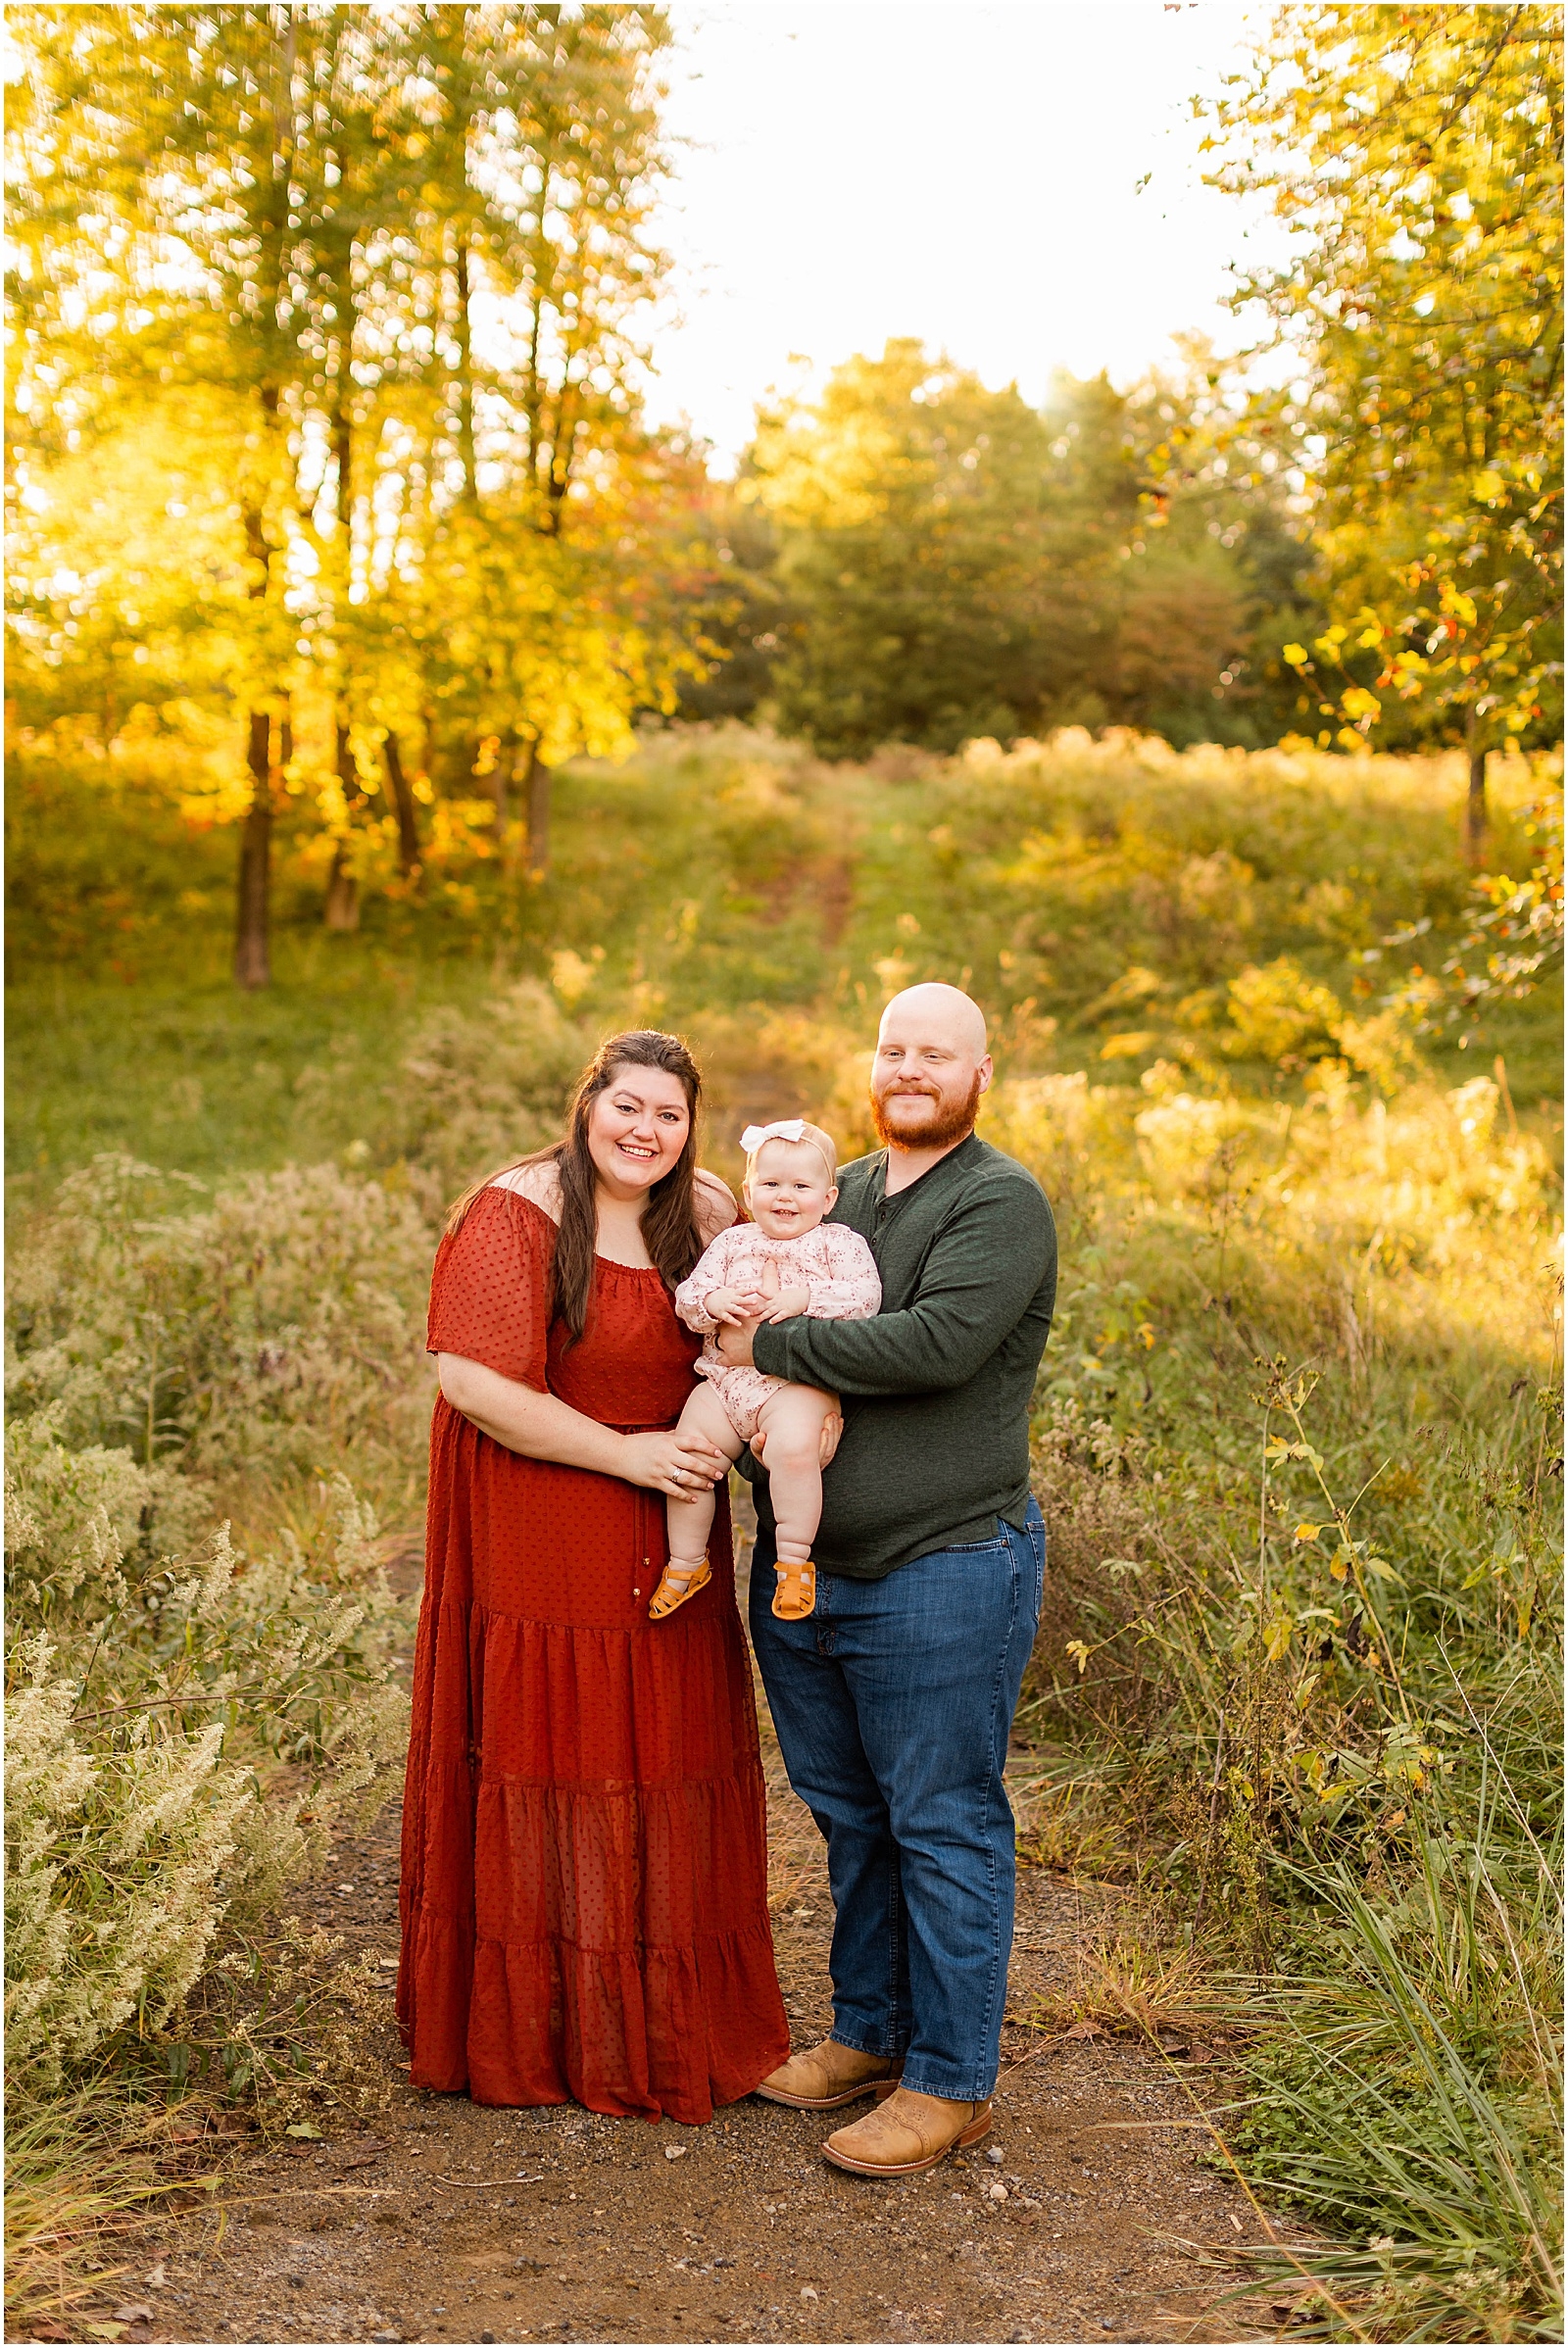 The Peck's Fall Family Session Bret and Brandie Photography | Evansville Indiana Wedding Photographers_0001.jpg